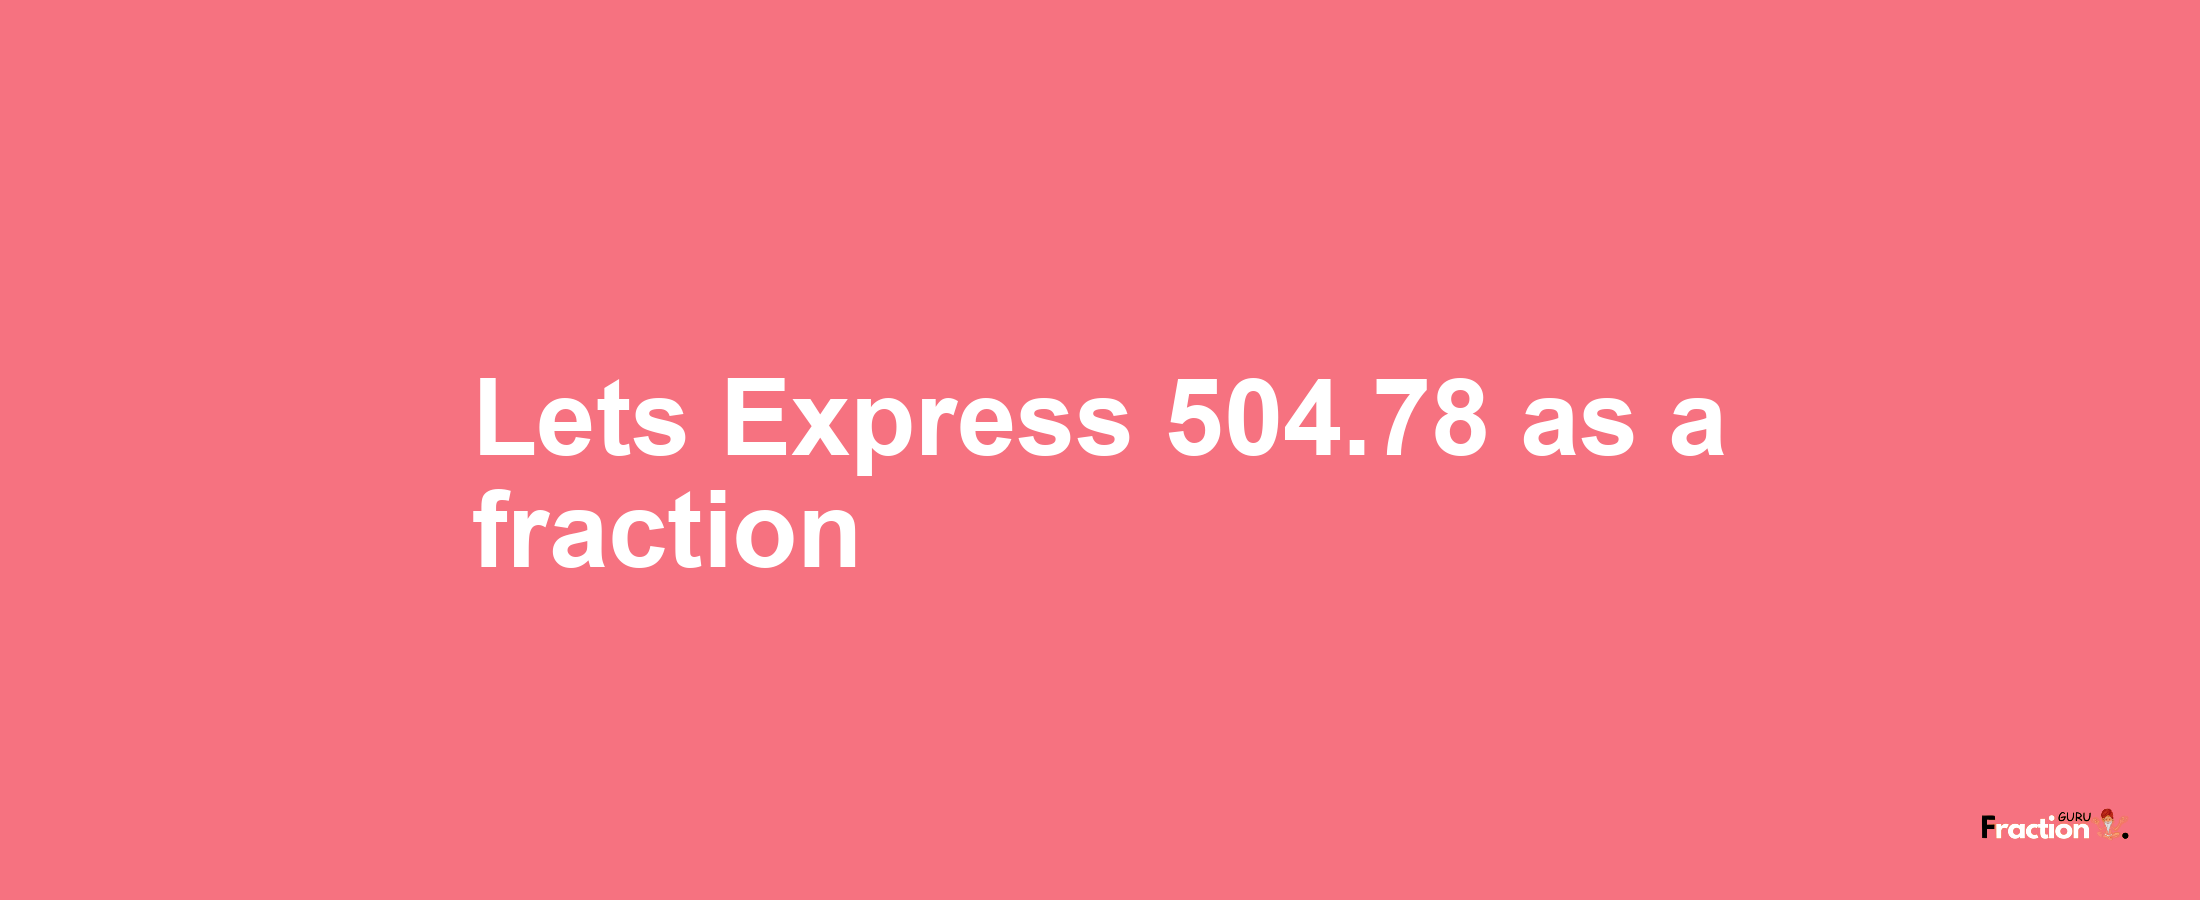 Lets Express 504.78 as afraction